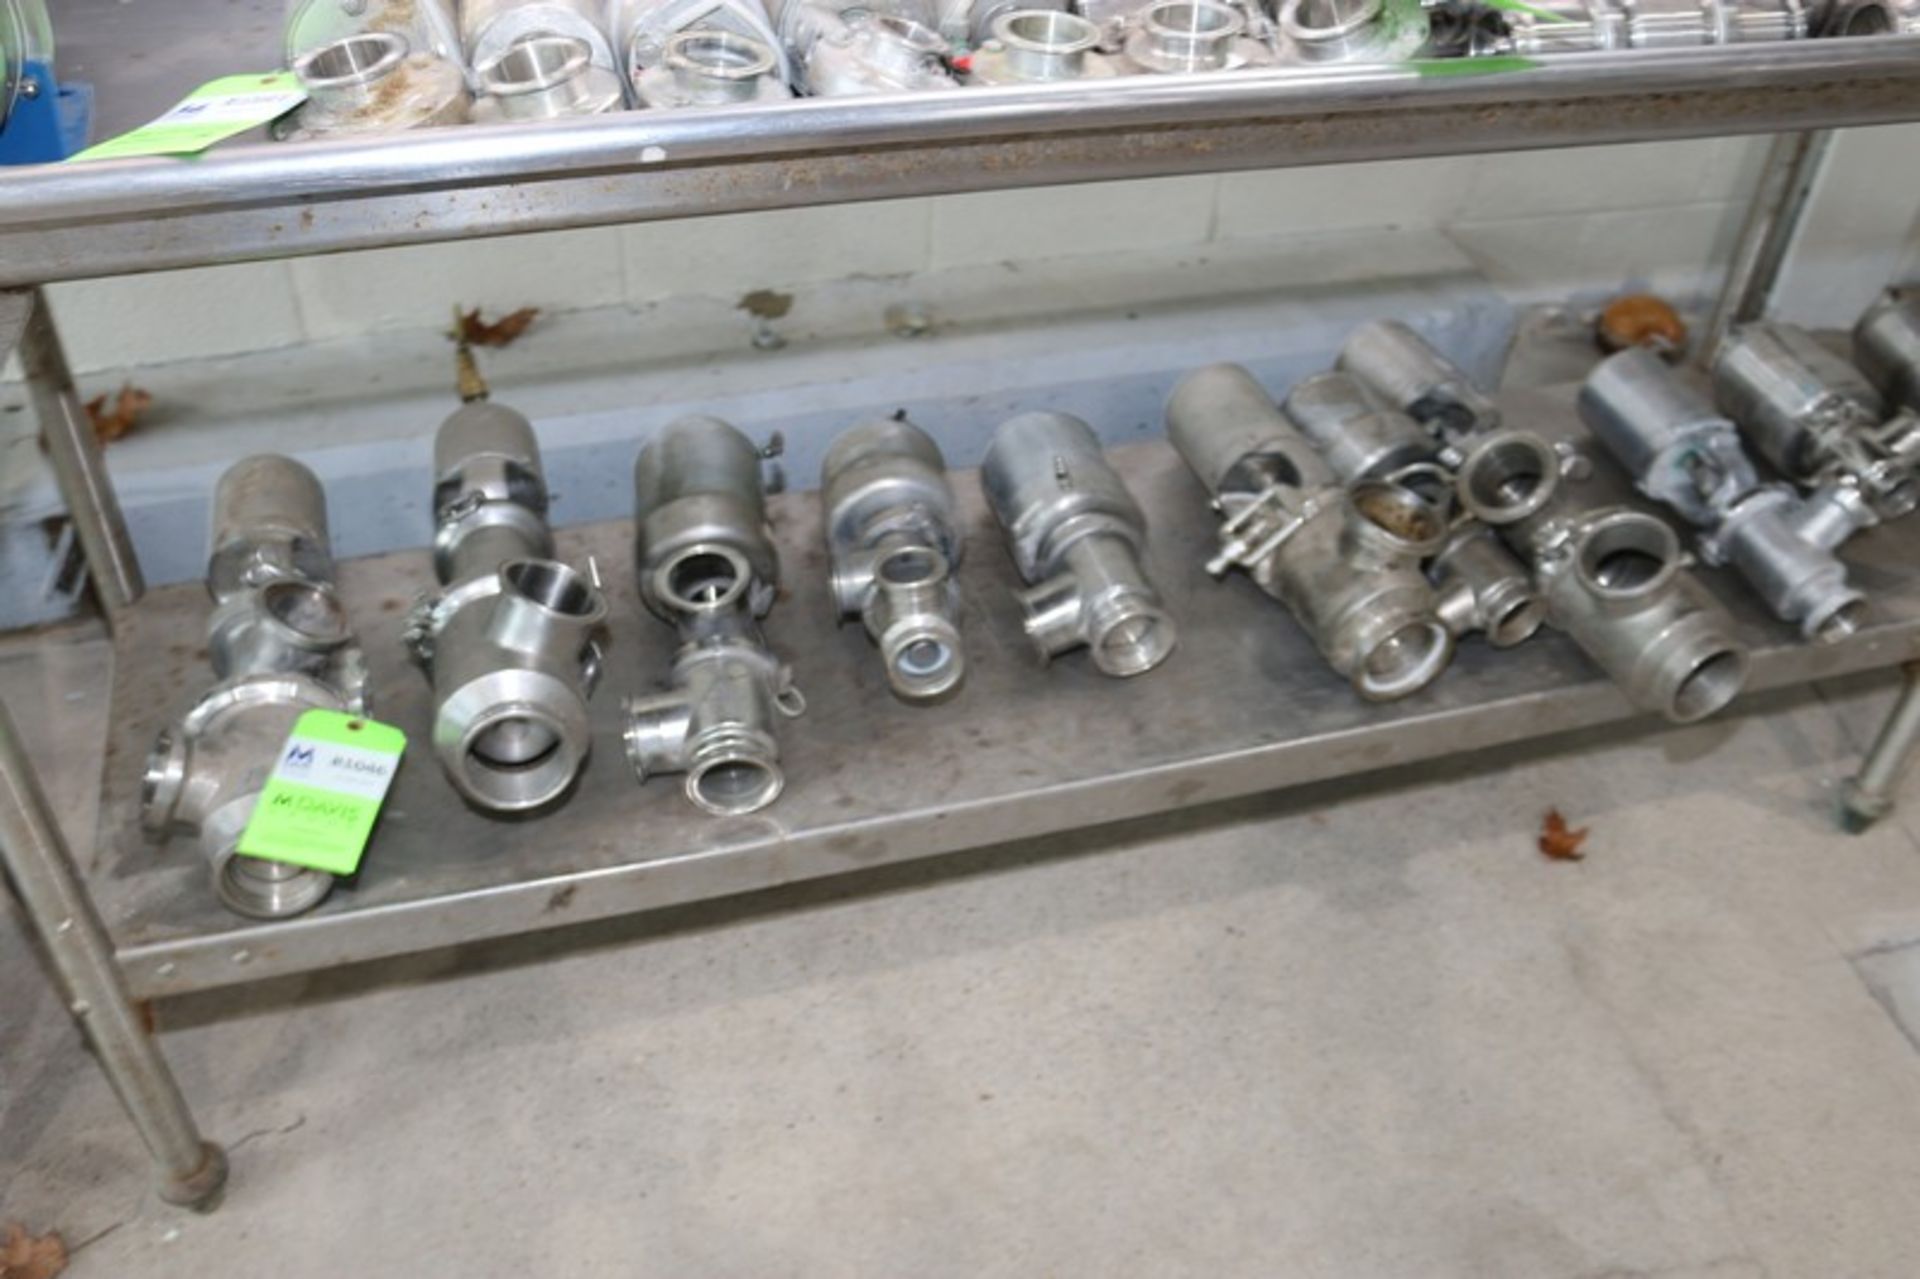 (16) S/S Air Valves,  Some 2-Way Type & 3-Way Type, Assorted Sizes (INV#81046)(Located @ the MDG - Image 2 of 4